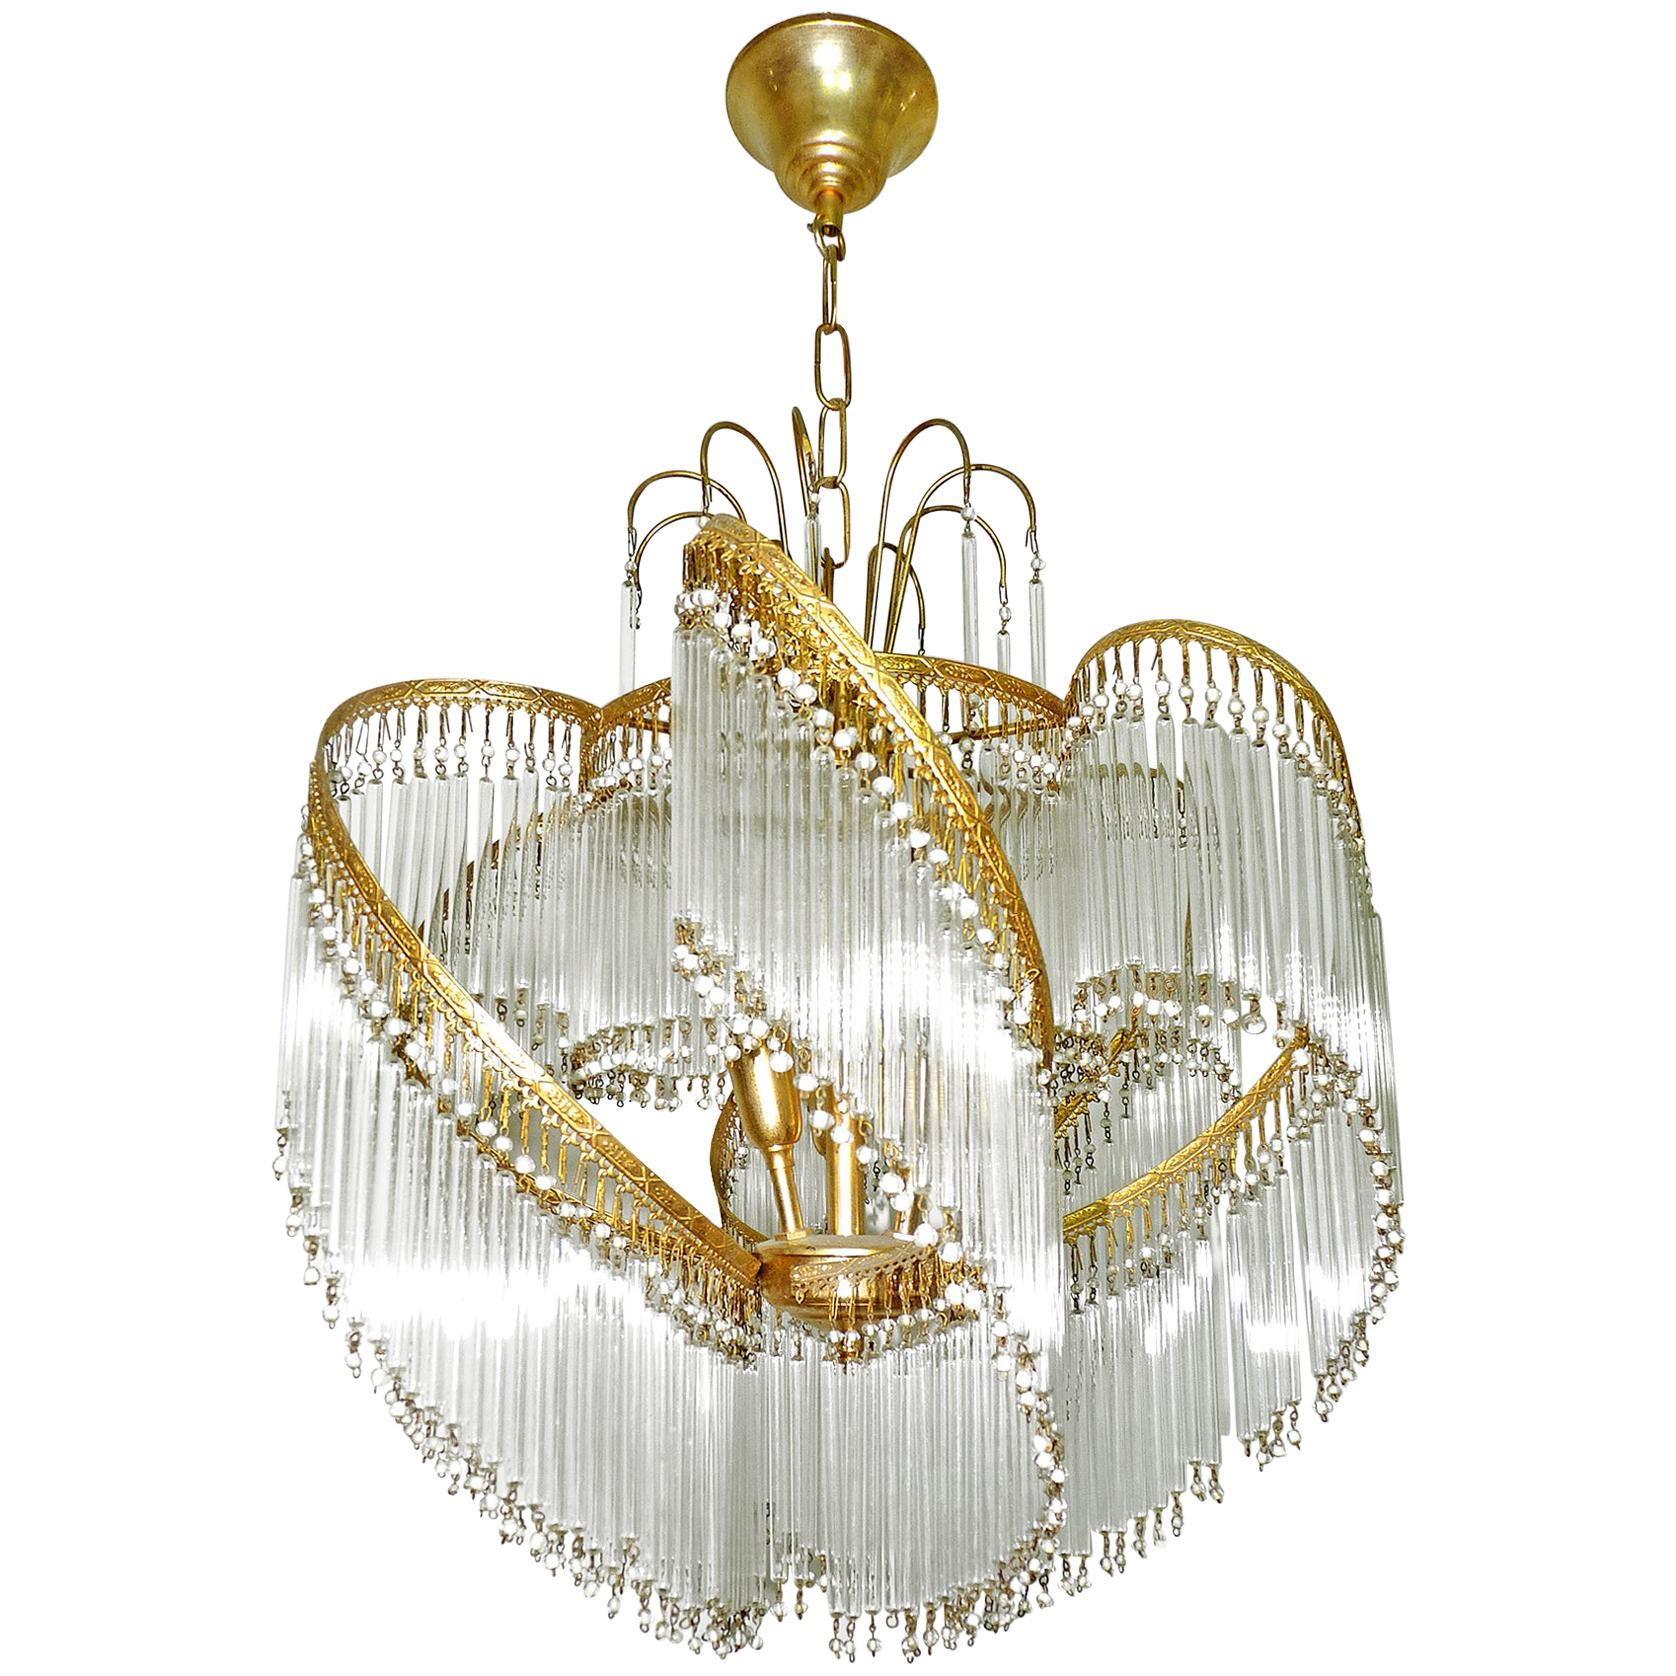 Fabulous midcentury Art Deco or Art Nouveau clear crystal glass fringe gilt spiral chandelier.
Measures:
Diameter 20 in/ 50 cm
Height 31.5 in/ 80 cm
Weight: 11 lb/ 5 Kg
Three light bulbs E14/ Good working condition/European wiring.
Your item